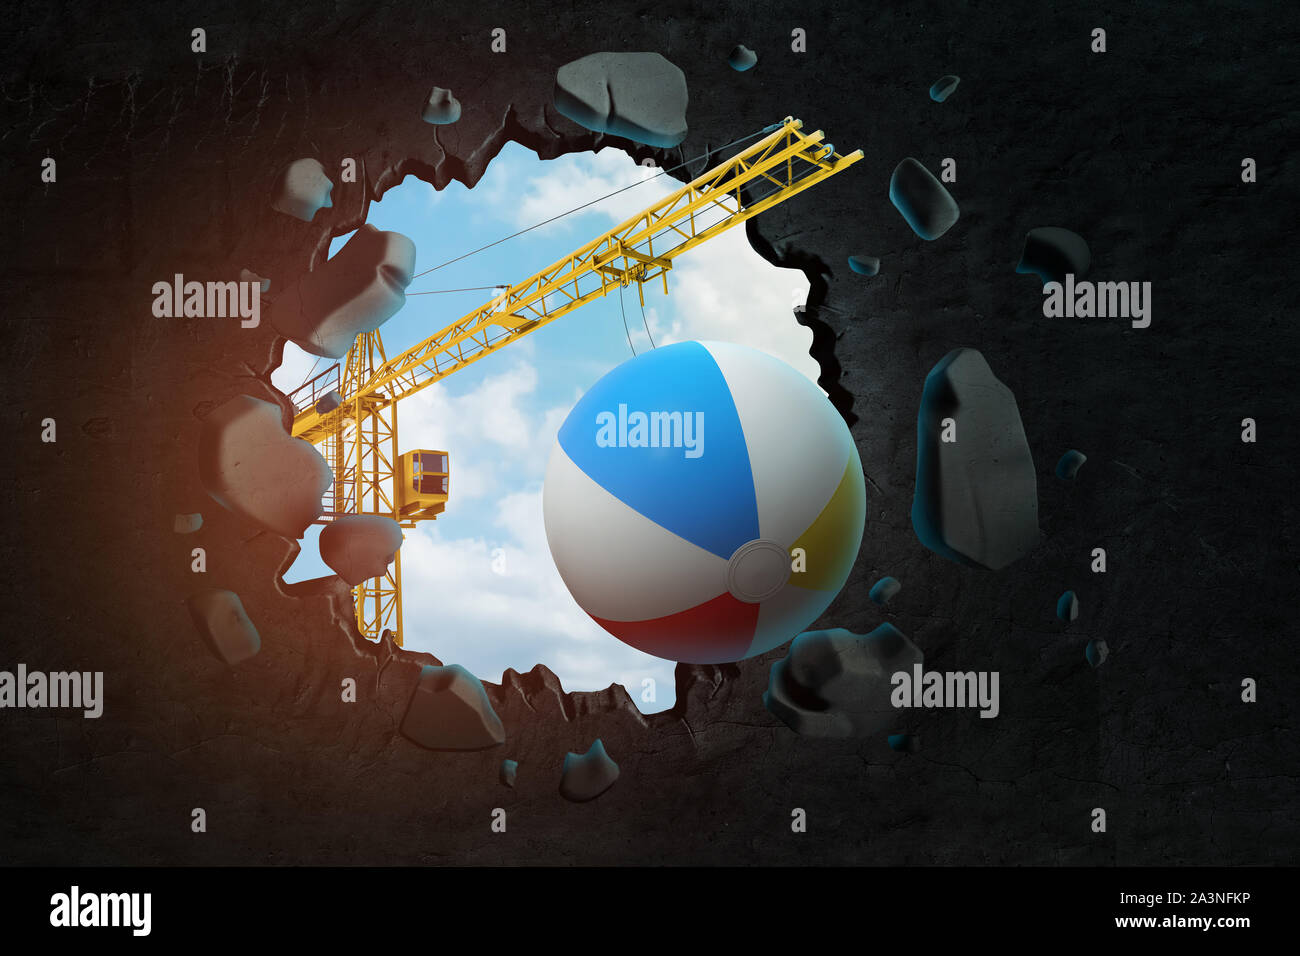 3d rendering of hoisting crane carrying beach ball and breaking hole in black wall with blue sky seen through. Stock Photo